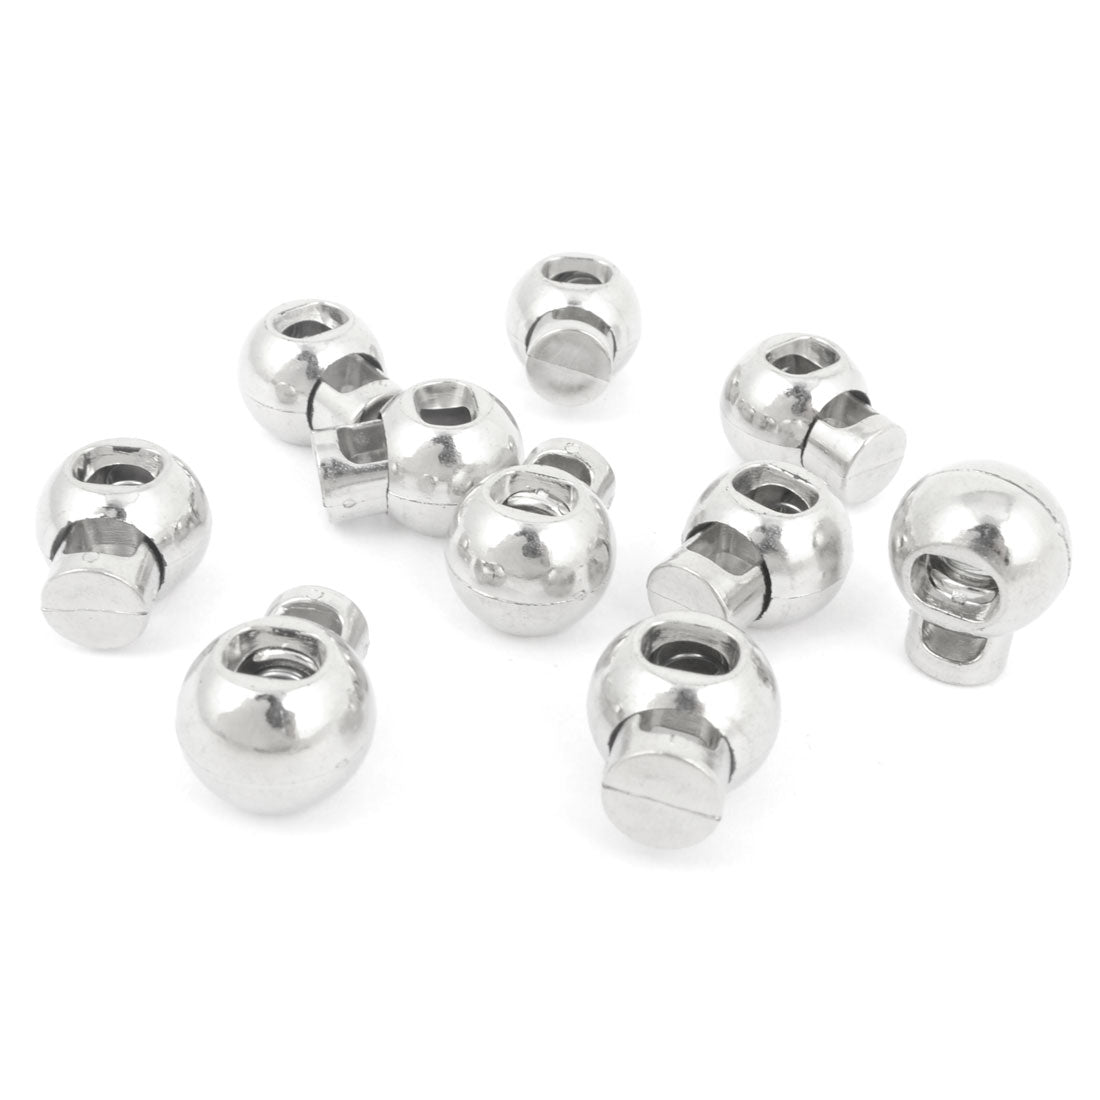 uxcell Uxcell Backpack Drawstring Silver Tone 8.5mm x 6mm Single Hole Round Head Spring Cord Locks Toggles 10 Pcs